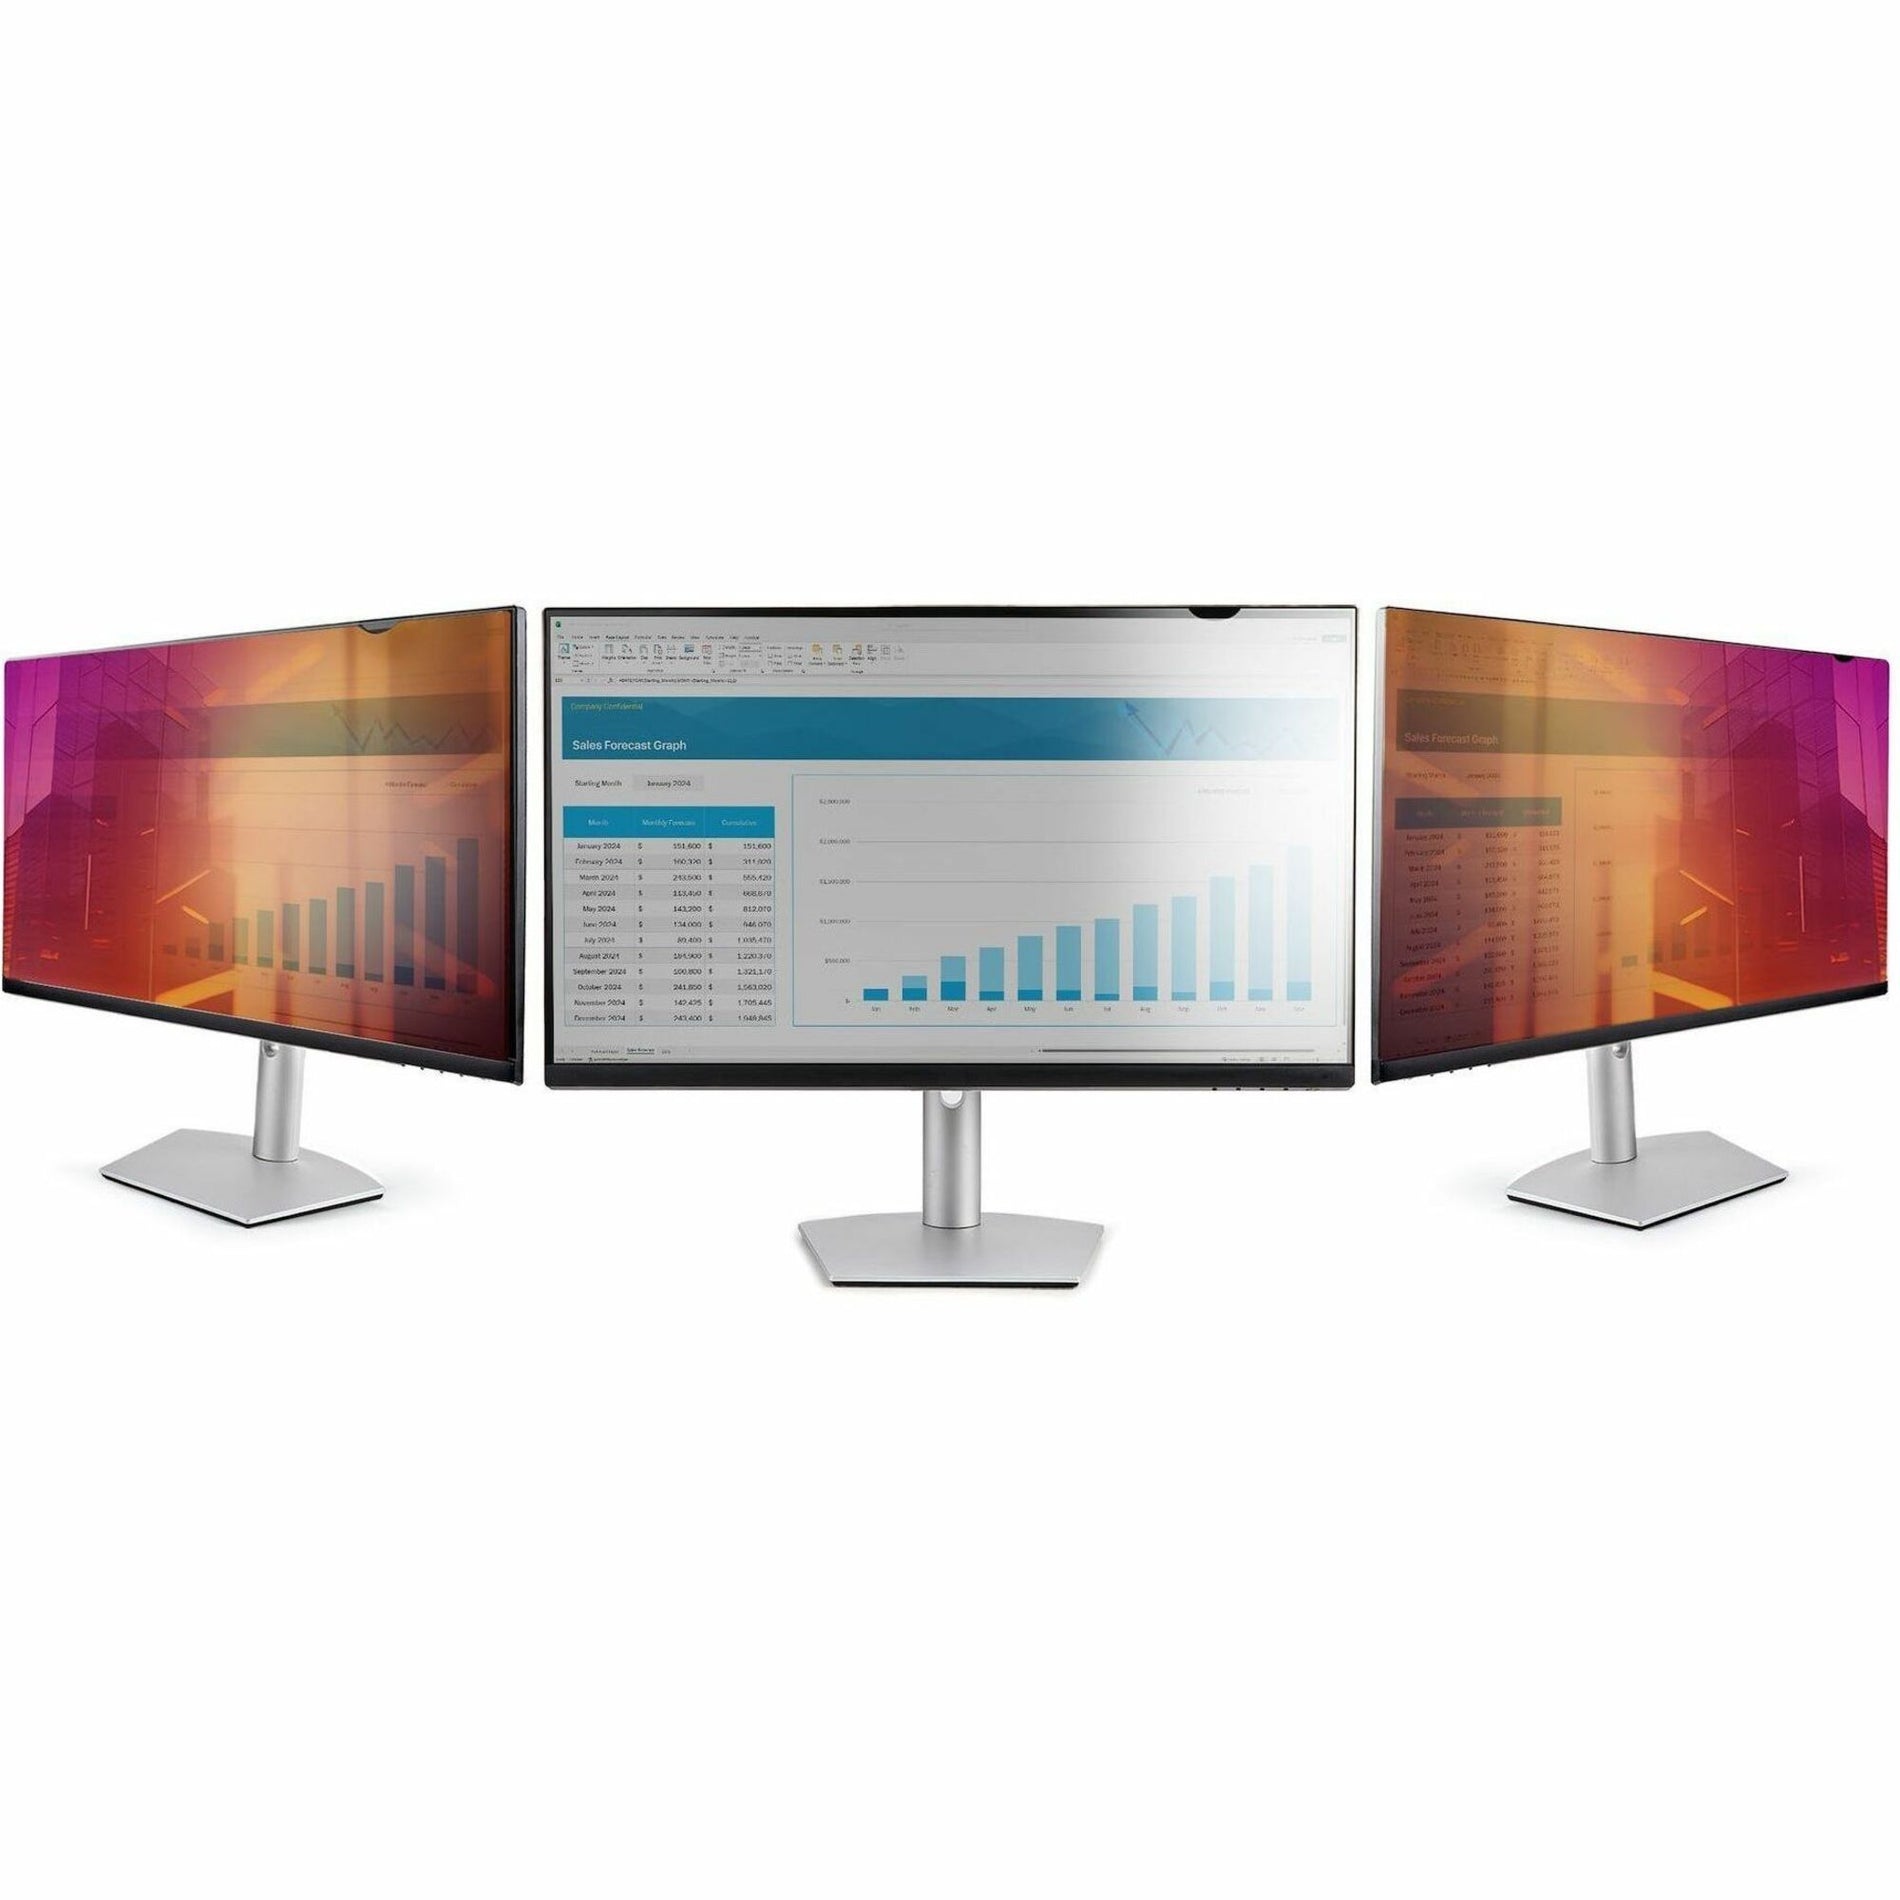 StarTech.com 238G-PRIVACY-SCREEN Privacy Screen Filter, Residue-free, Removable, Microlouver Privacy Technology, Reversible, Widescreen, 16:9, 23.8" LCD Monitor, Blue Light Reduction